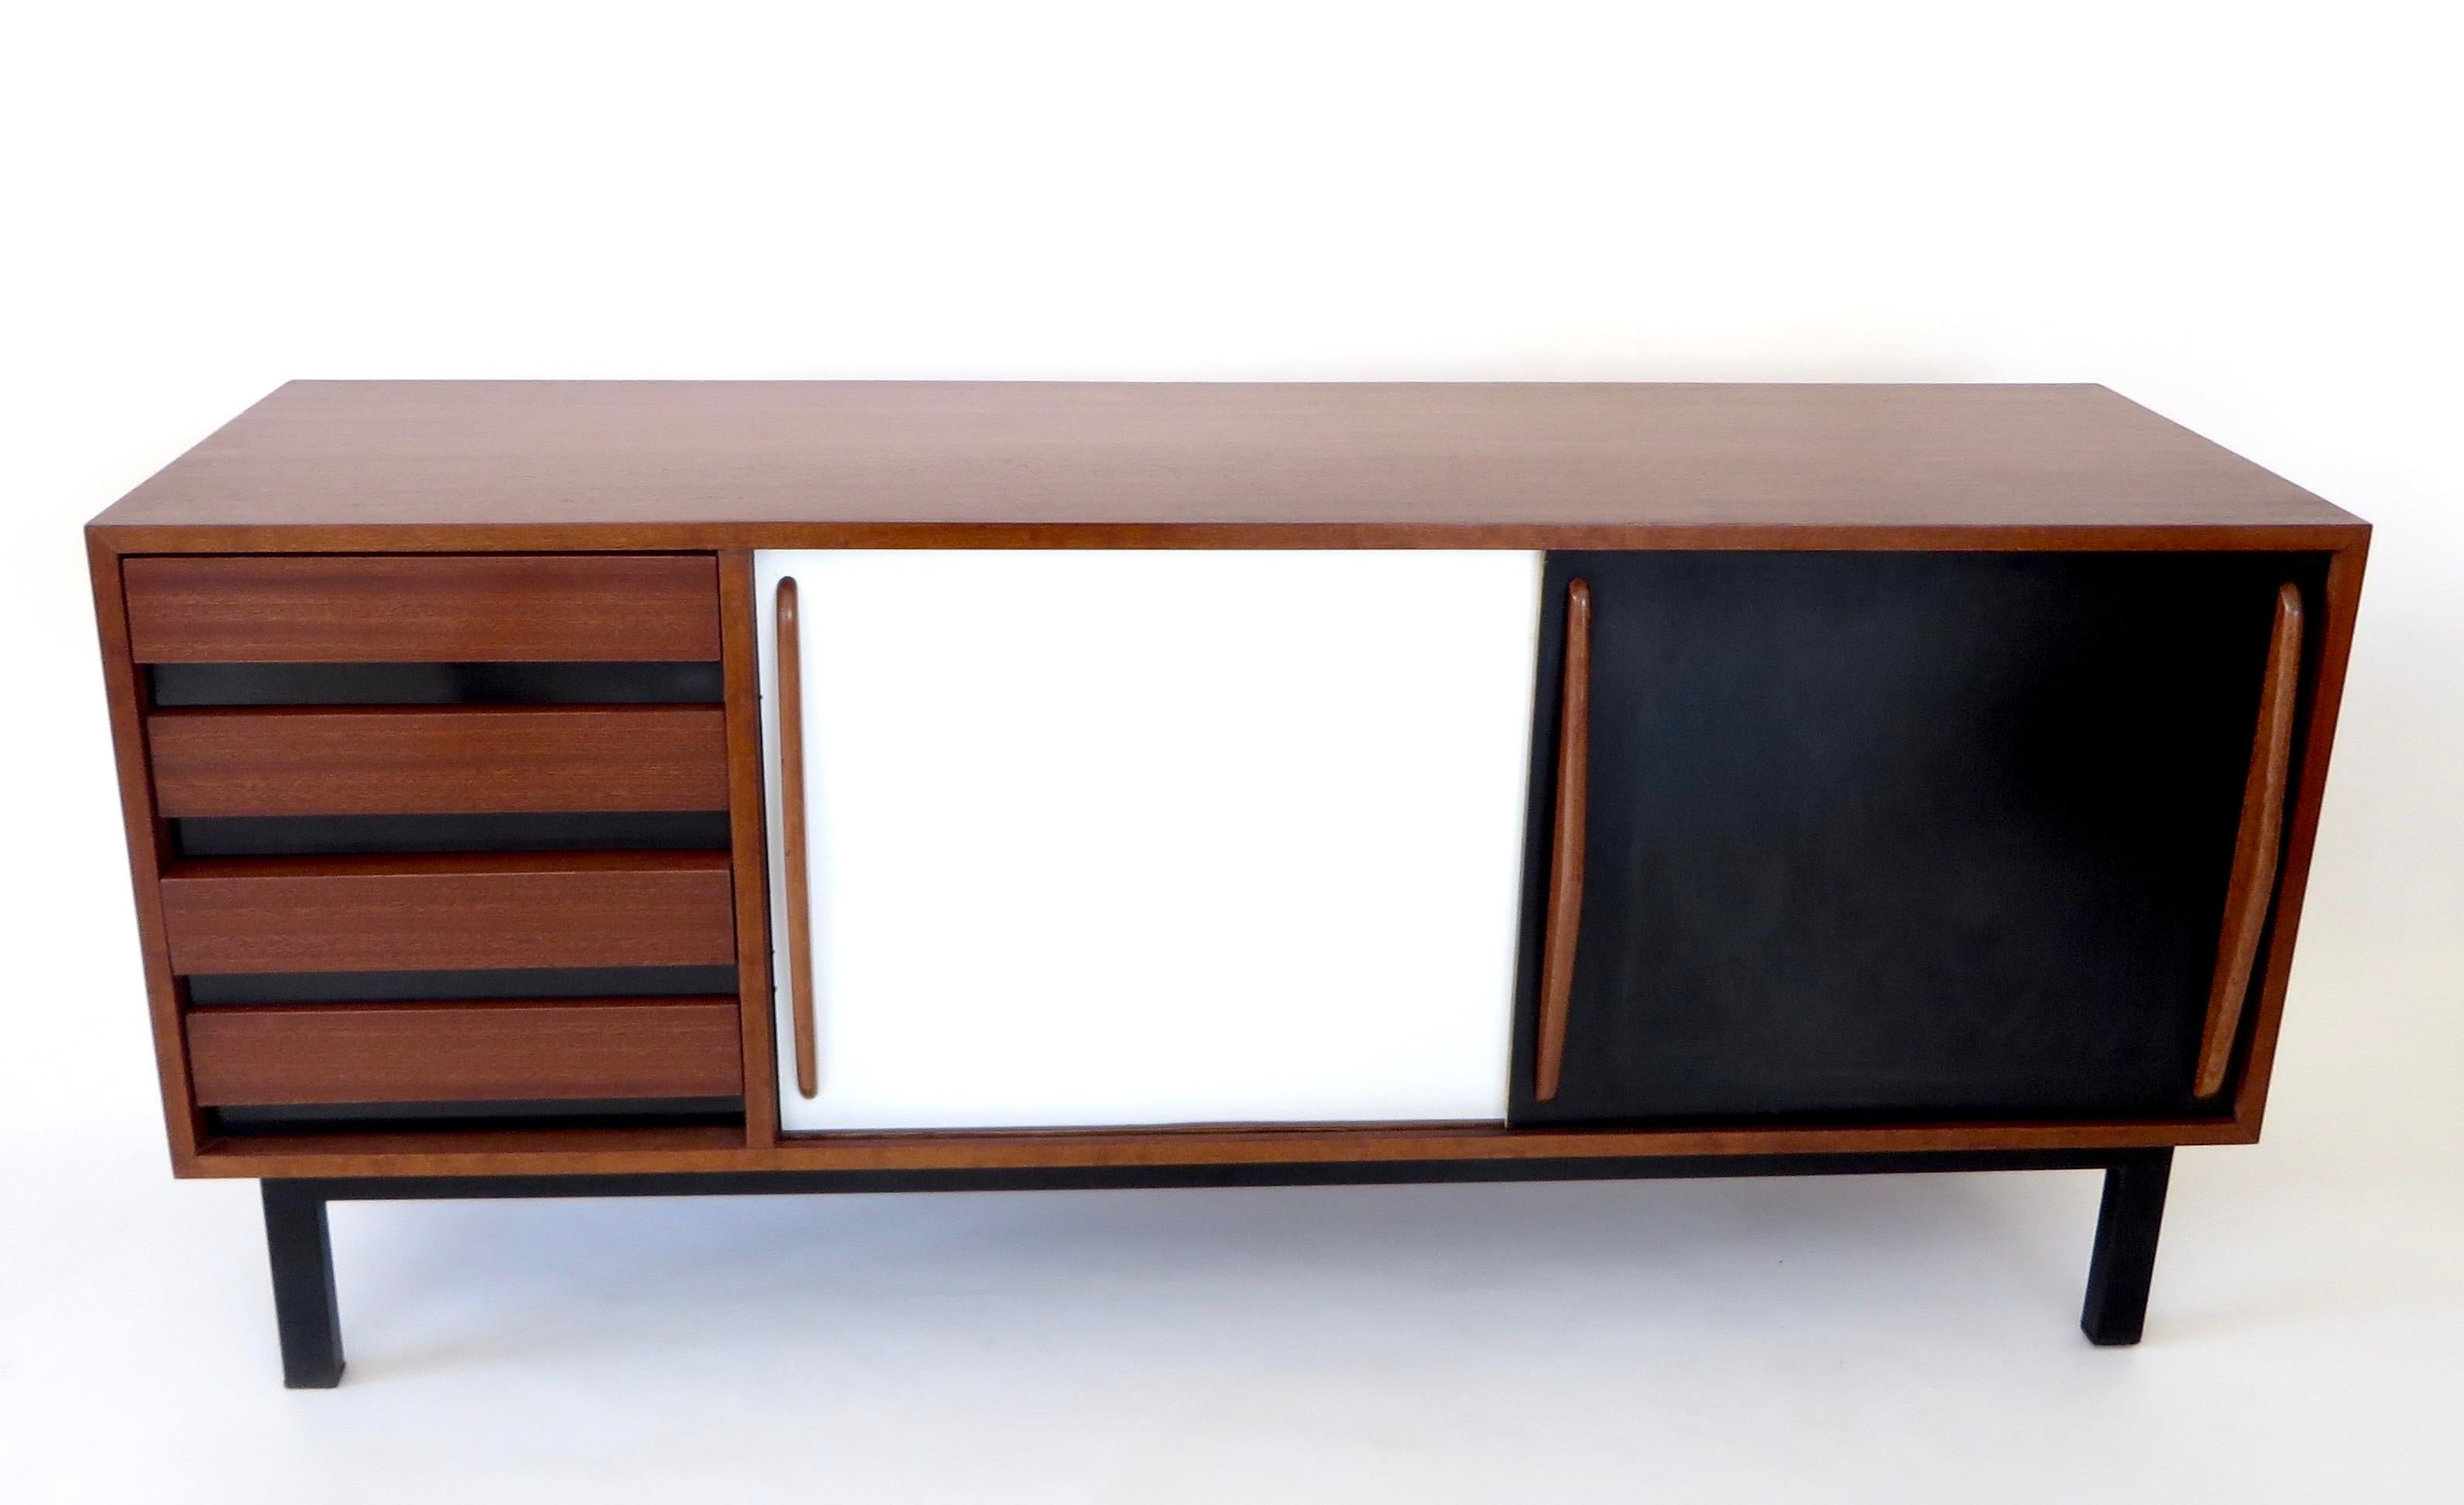 This Cansado 4 drawer and sliding door sideboard was designed by Charlotte Perriand circa 1950 in the city of the same name in Mauritania. 
It was manufactured in France during her association with Steph Simon gallery. 
It has a steel base,